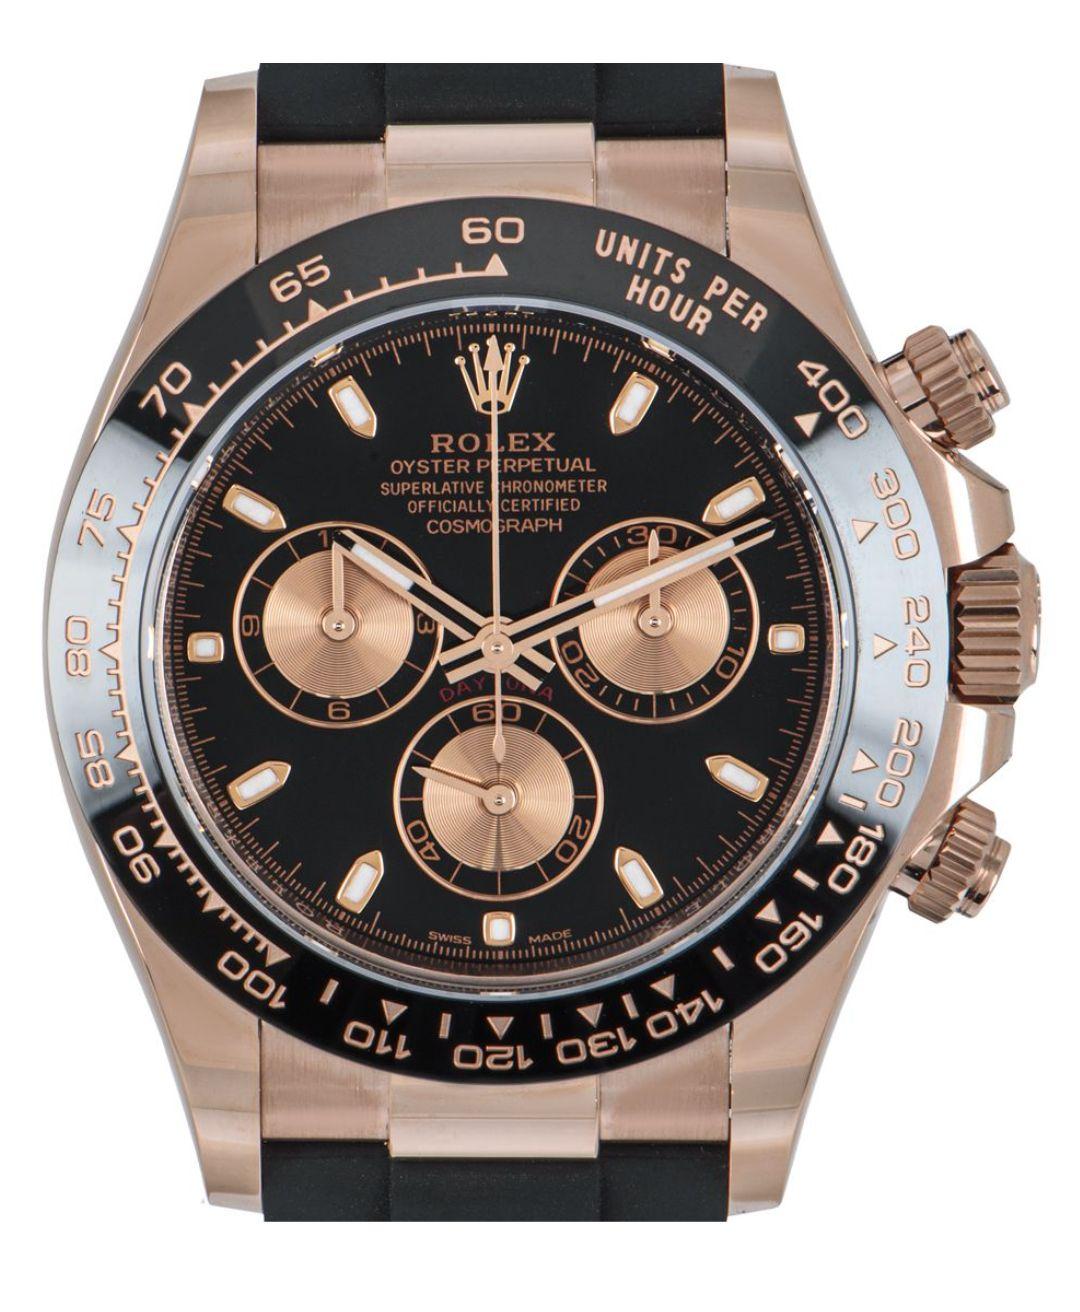 A rose gold Daytona by Rolex, with a black and pink dial. Featuring a black ceramic bezel with a tachymetric scale, three counters and pushers; this high performance chronograph was designed to be the ultimate timing tool for endurance racing